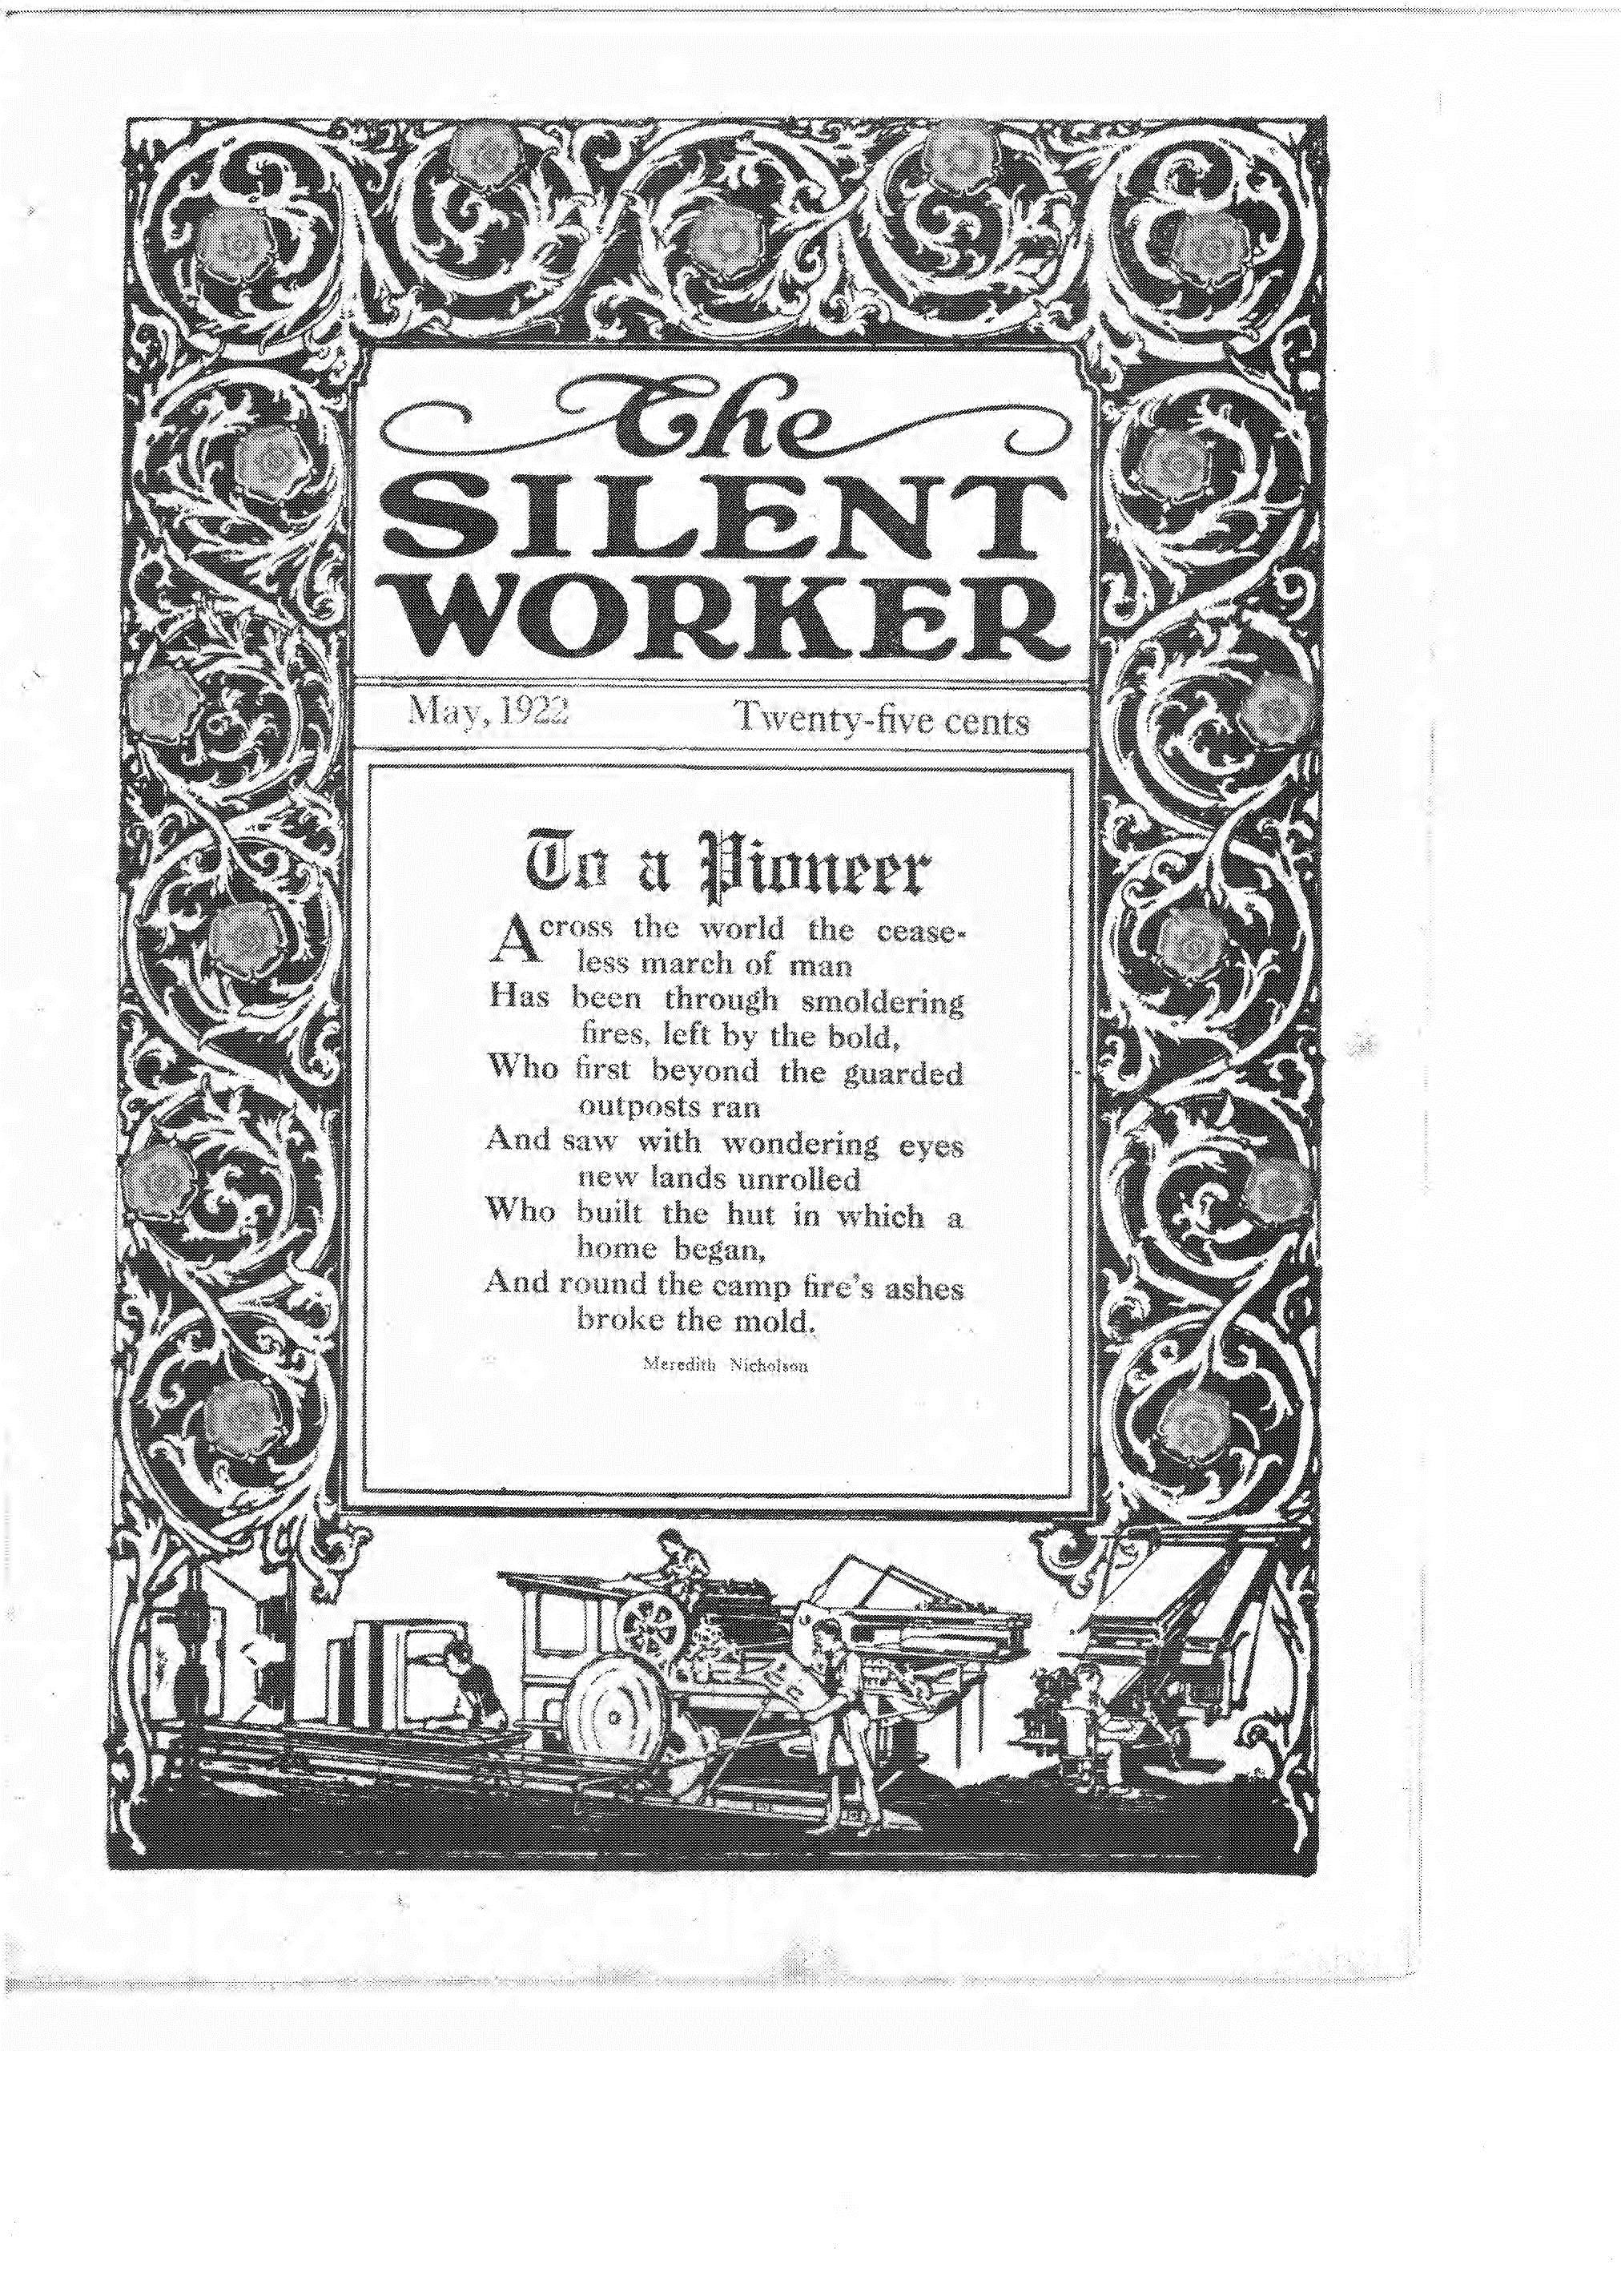 Peridical cover of The Silent Worker, containing a poem by Meredith Nicholson surrounded by a vine-patterned border and an image of men working on typesetting machinery